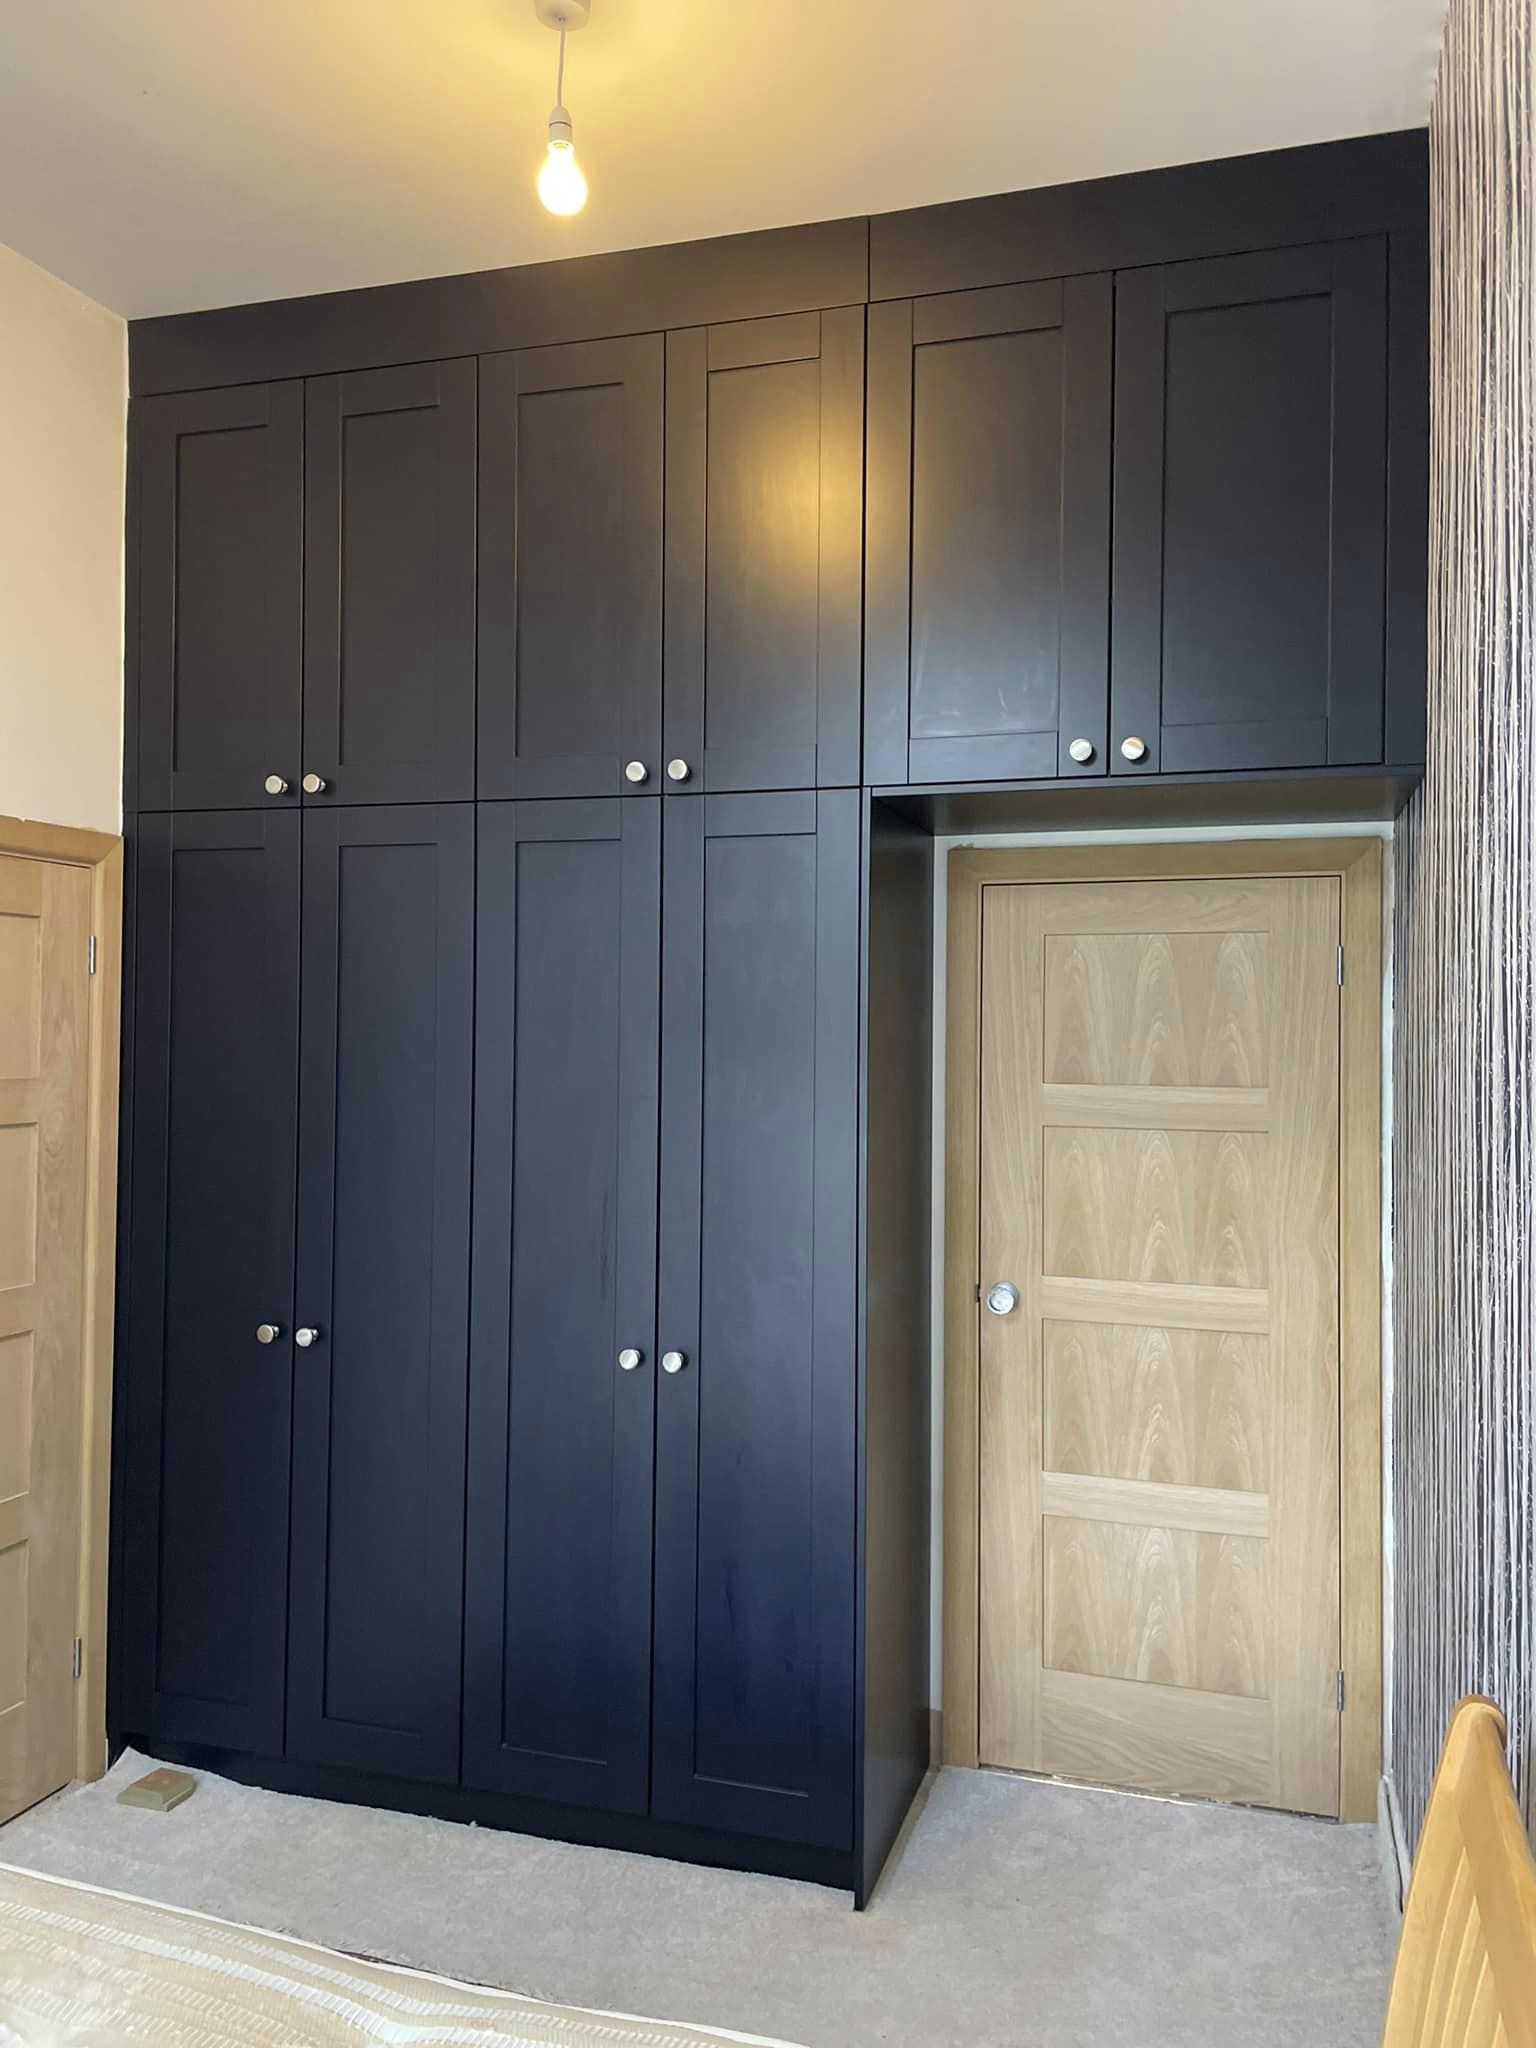 Explore fitted wardrobes options in West Sussex near East Grinstead